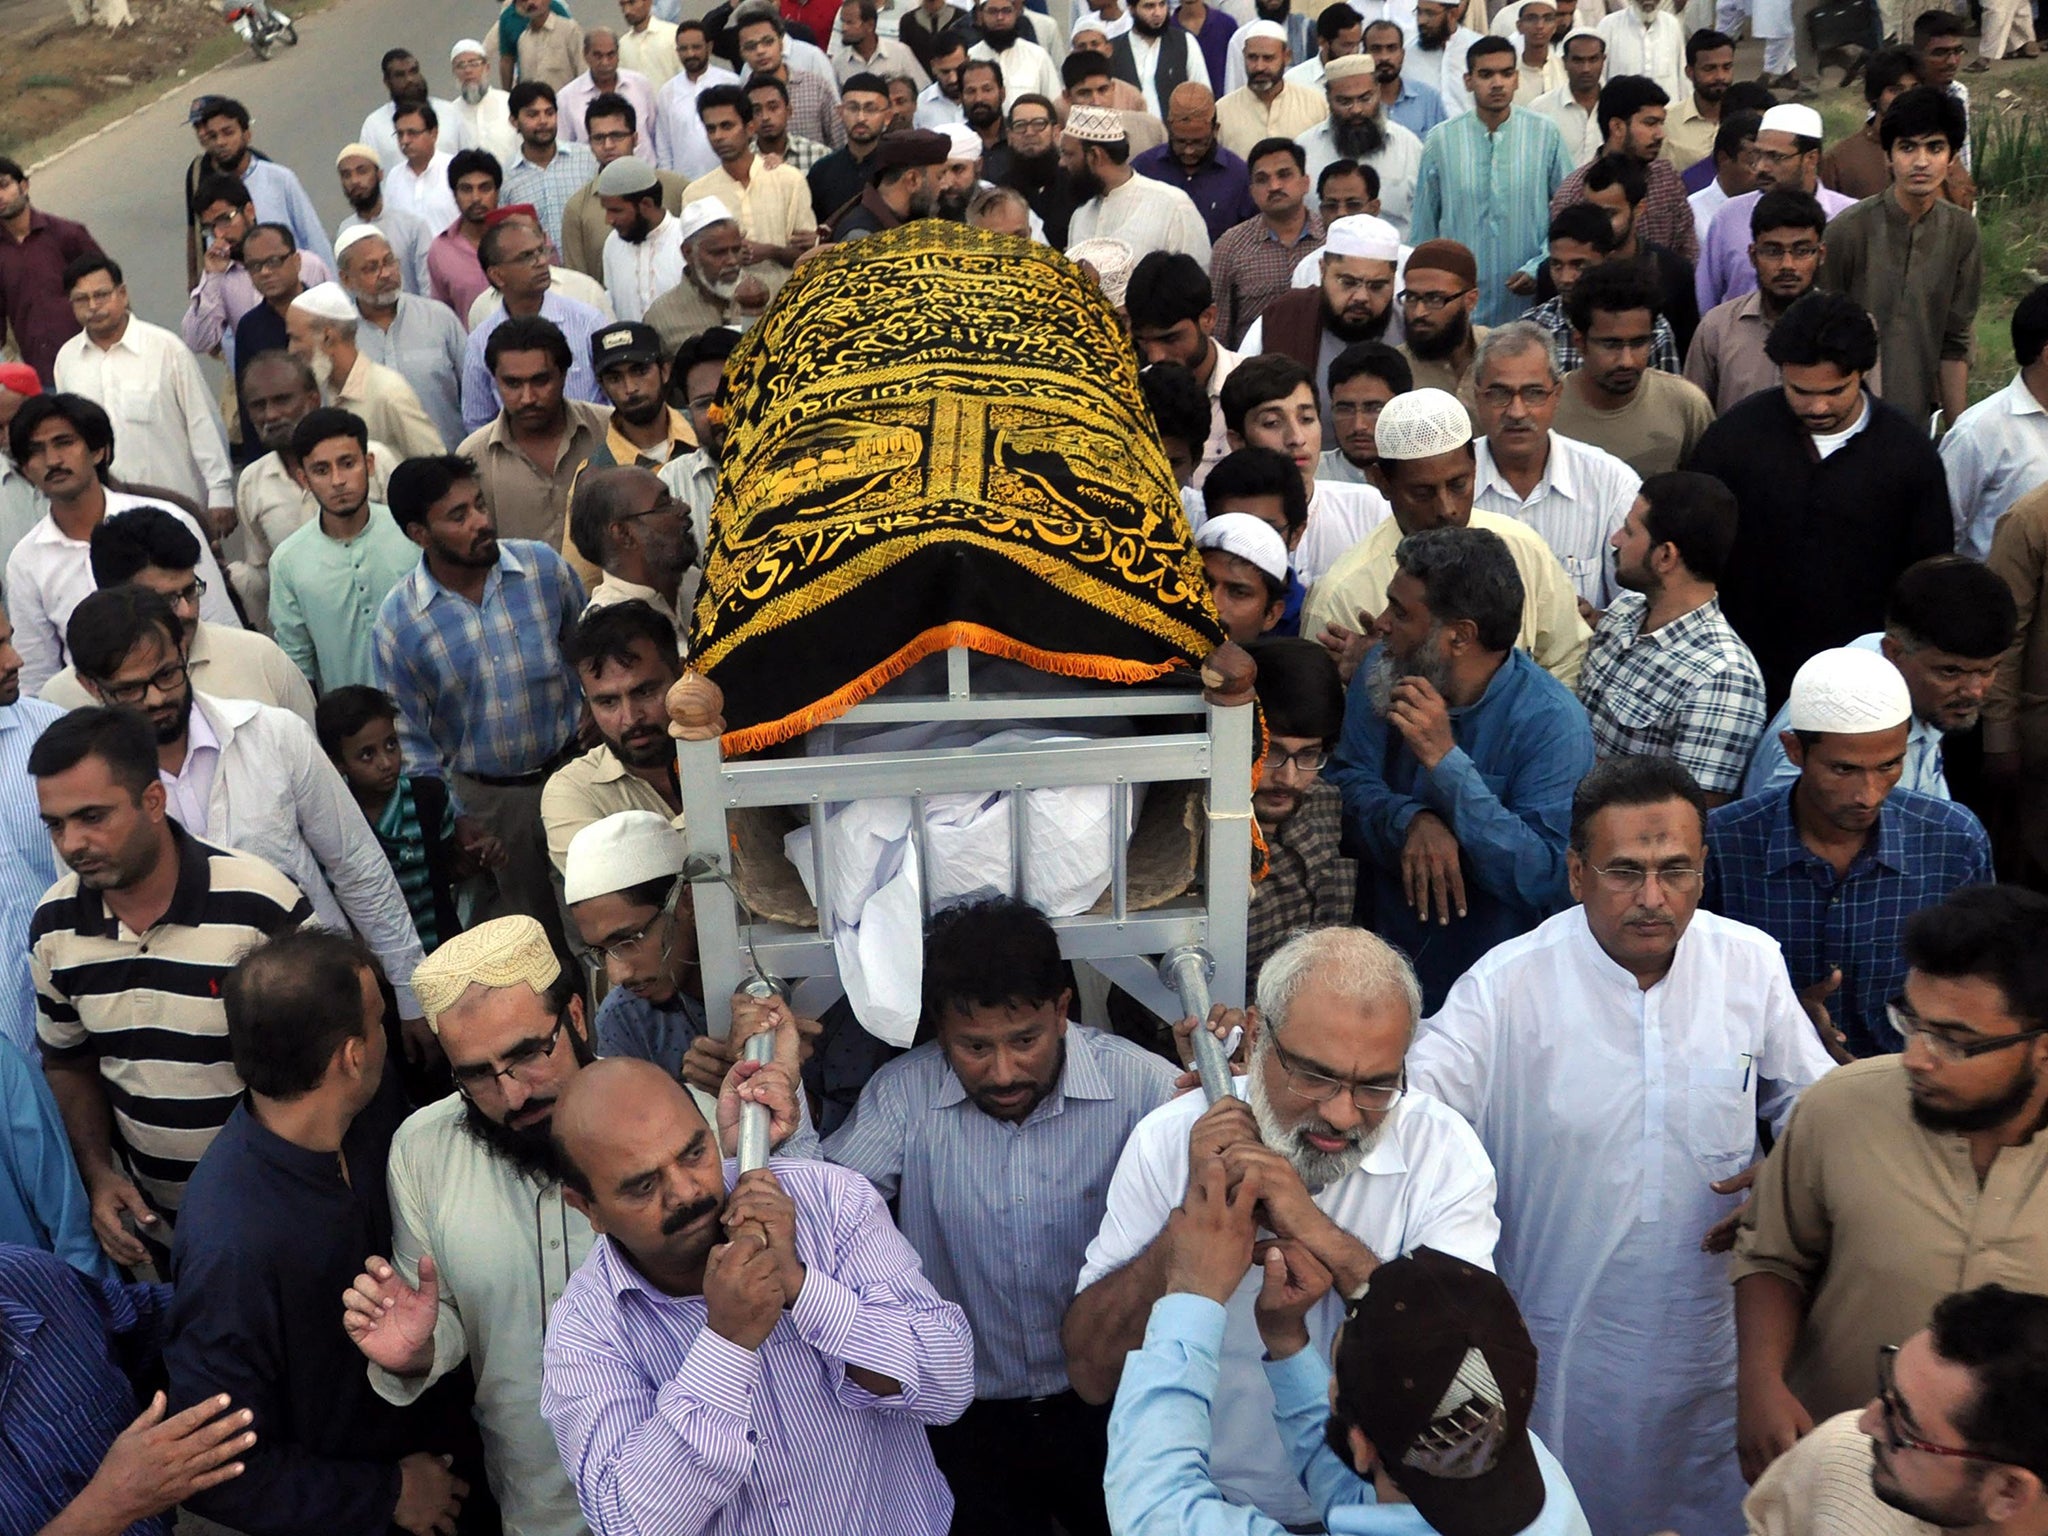 Pakistani people and relatives attending the funeral of Muhammad Shakil Auj, head of Islamic Studies at Karachi University, who was killed by unknown gunmen in restive Karachi, Pakistan